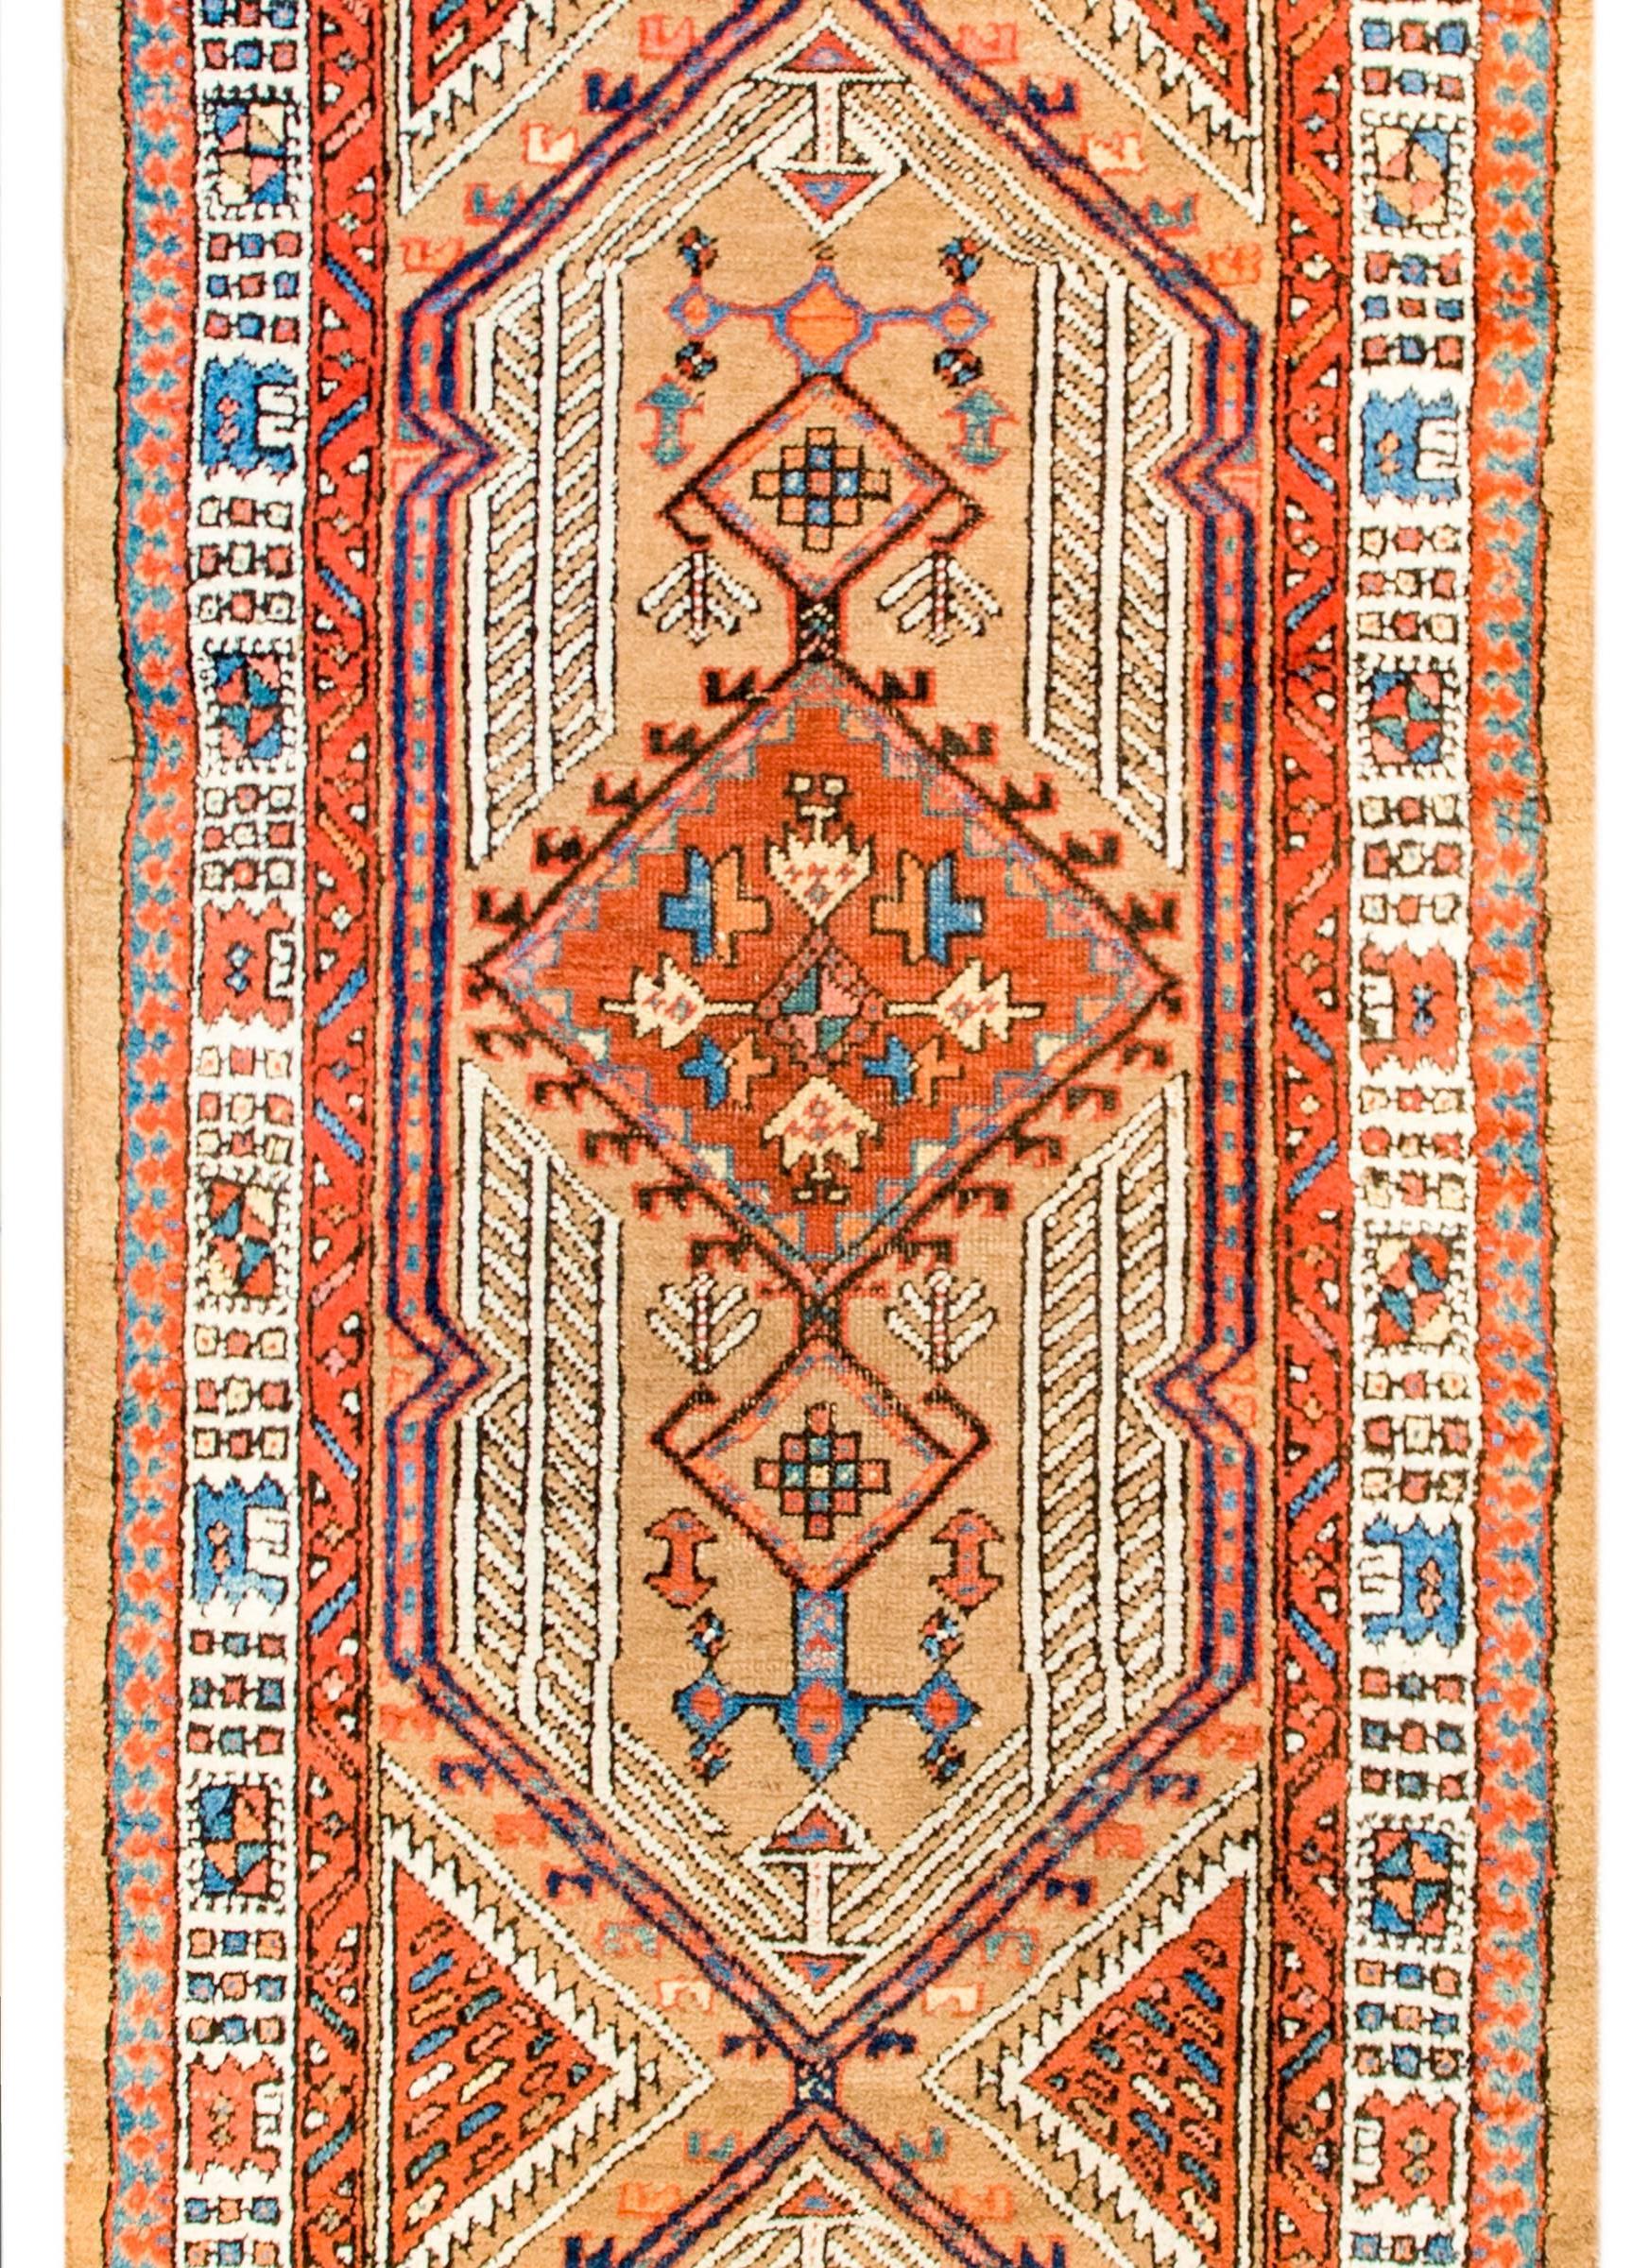 An amazing 19th century Persian Serab camel-hair runner with three large diamond medallions amidst a field of trees, vines, and flowers. The border is amazing with multiple geometric patterned stripes.